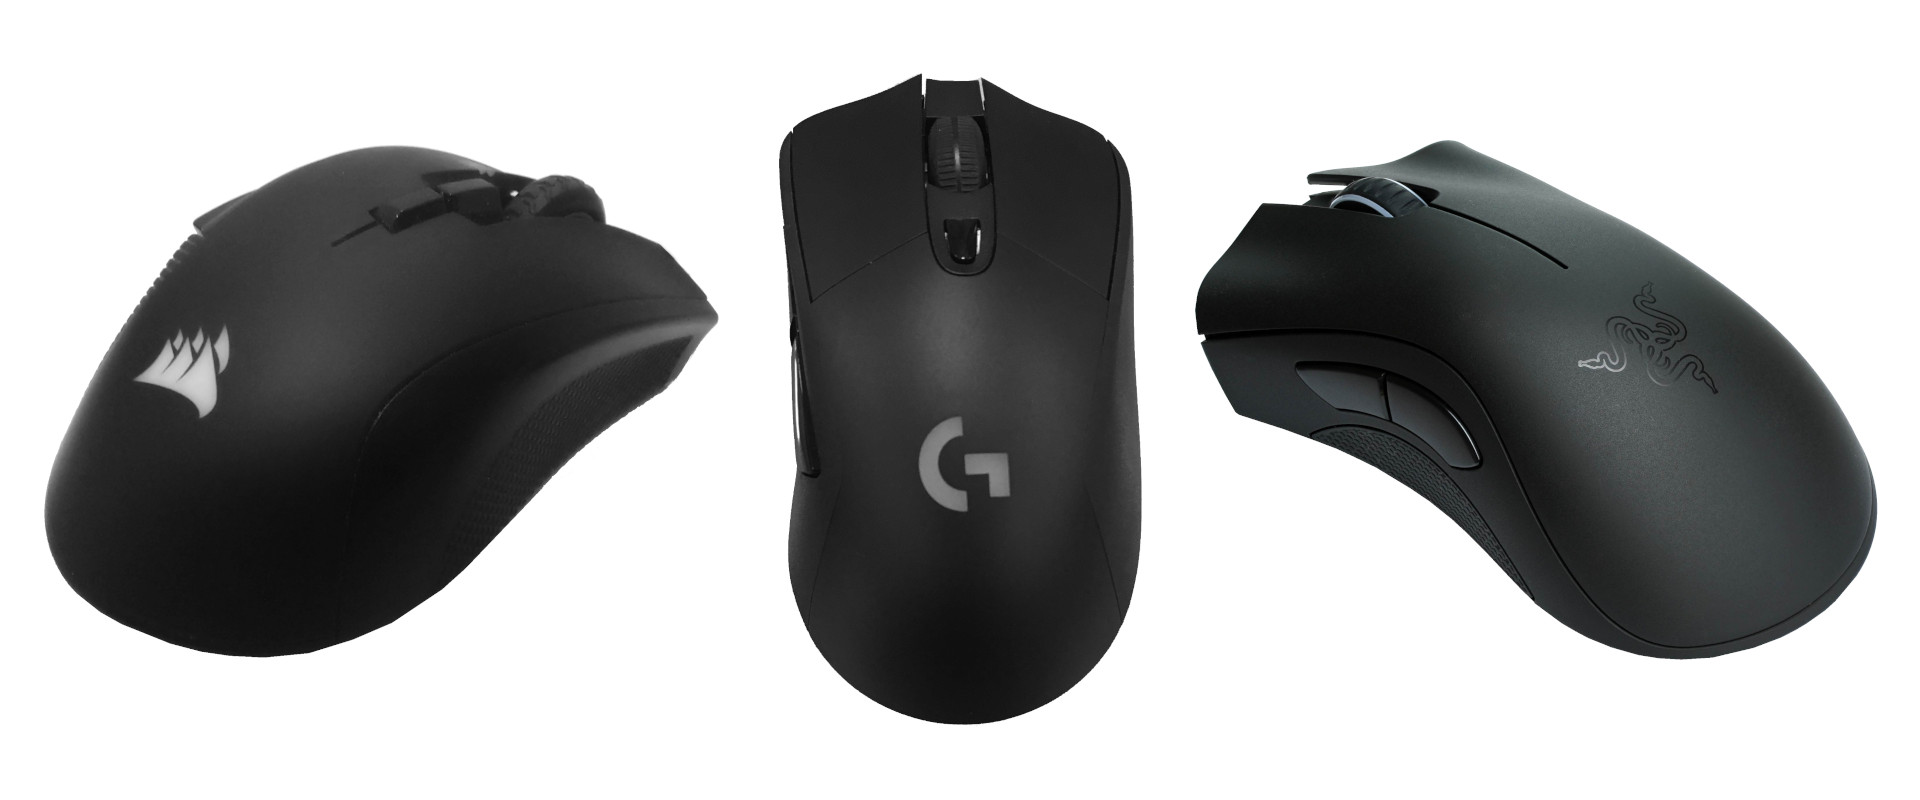 The Search For A Durable Computer Mouse